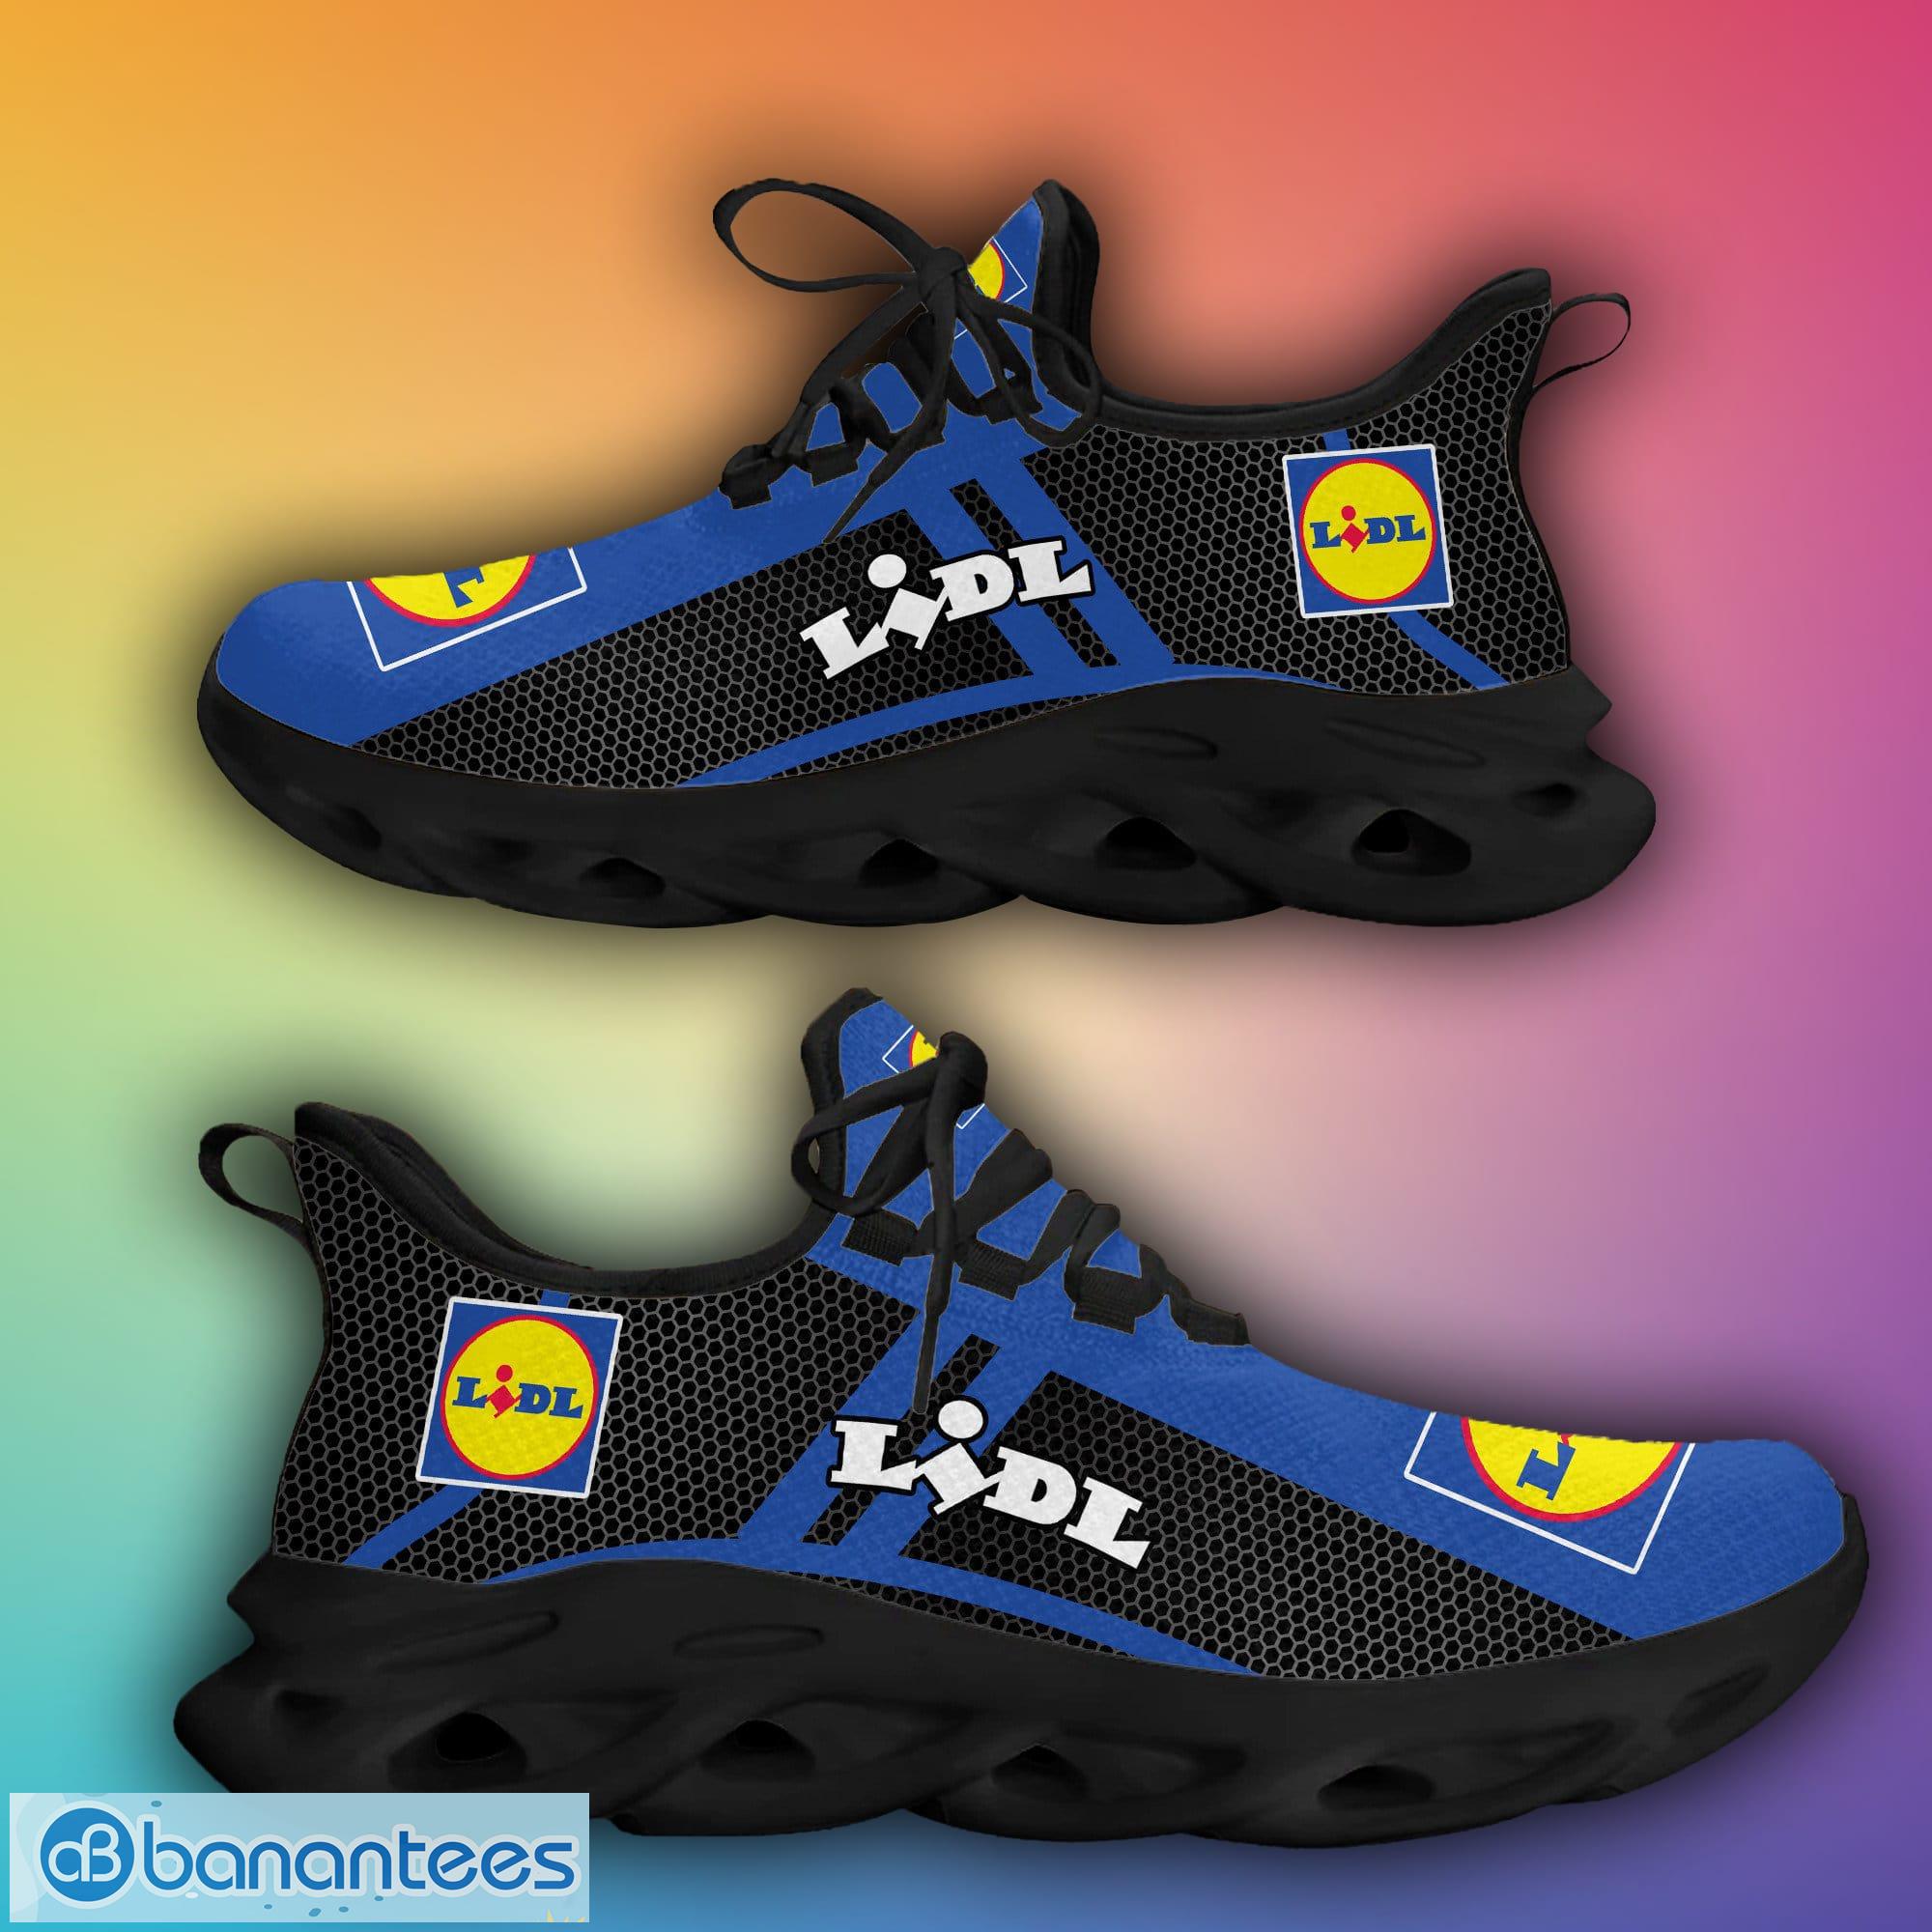 lidl Brand Logo Max Soul Shoes Emblem Running Sneakers Gift